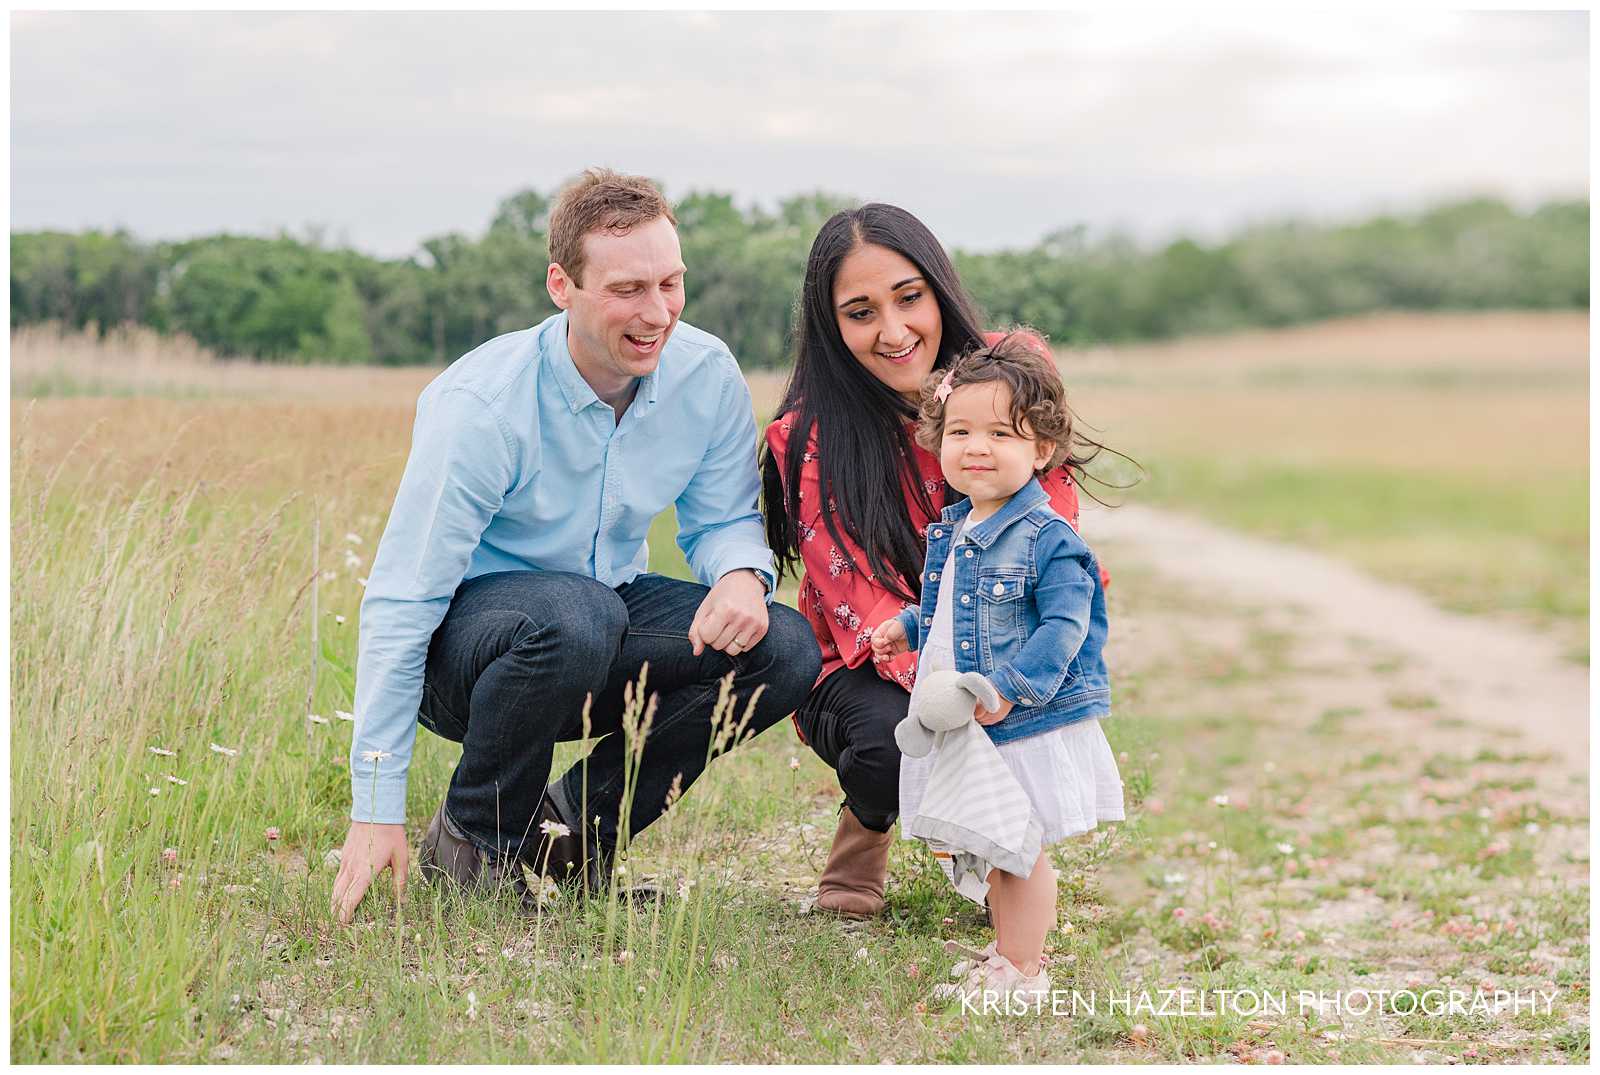 Happy family of three crouching in a meadow by Forest Park, IL photographer Kristen Hazelton